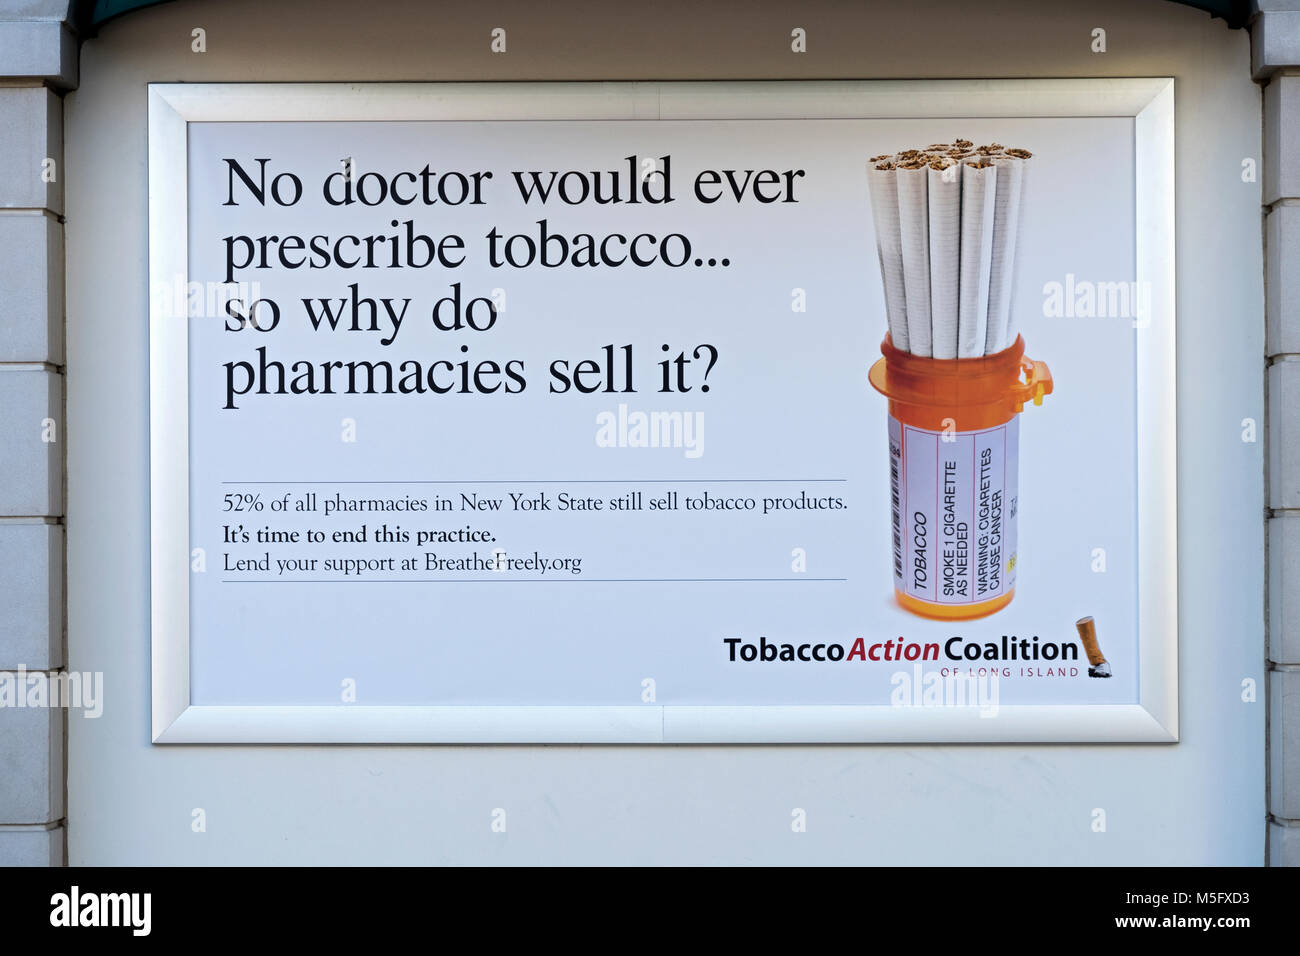 A poster in the Tanger Outlet Mall in Deer Park, Long Island urging pharmacies to stop selling tobacco products. Stock Photo